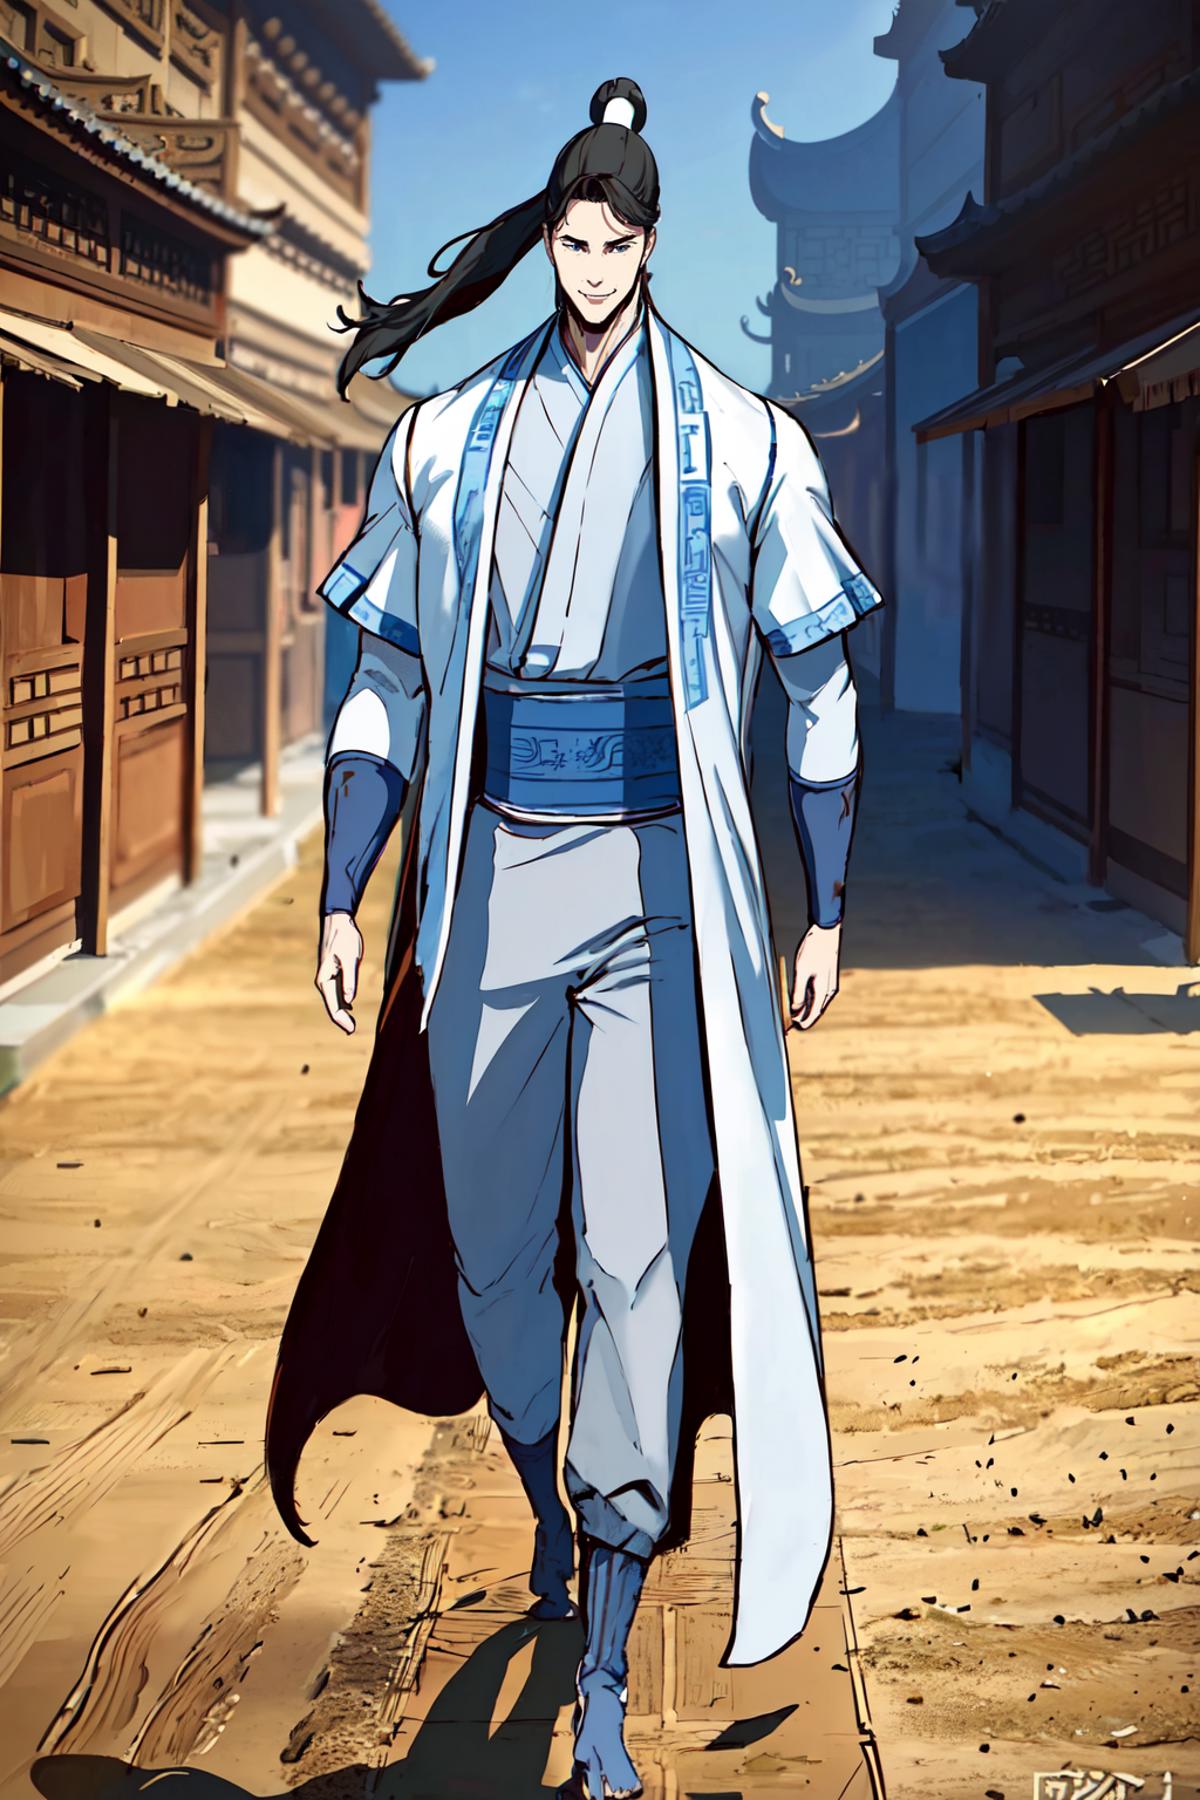 Jin So-Han from A Dance of Swords in the Night (Manhwa) image by Bloodysunkist